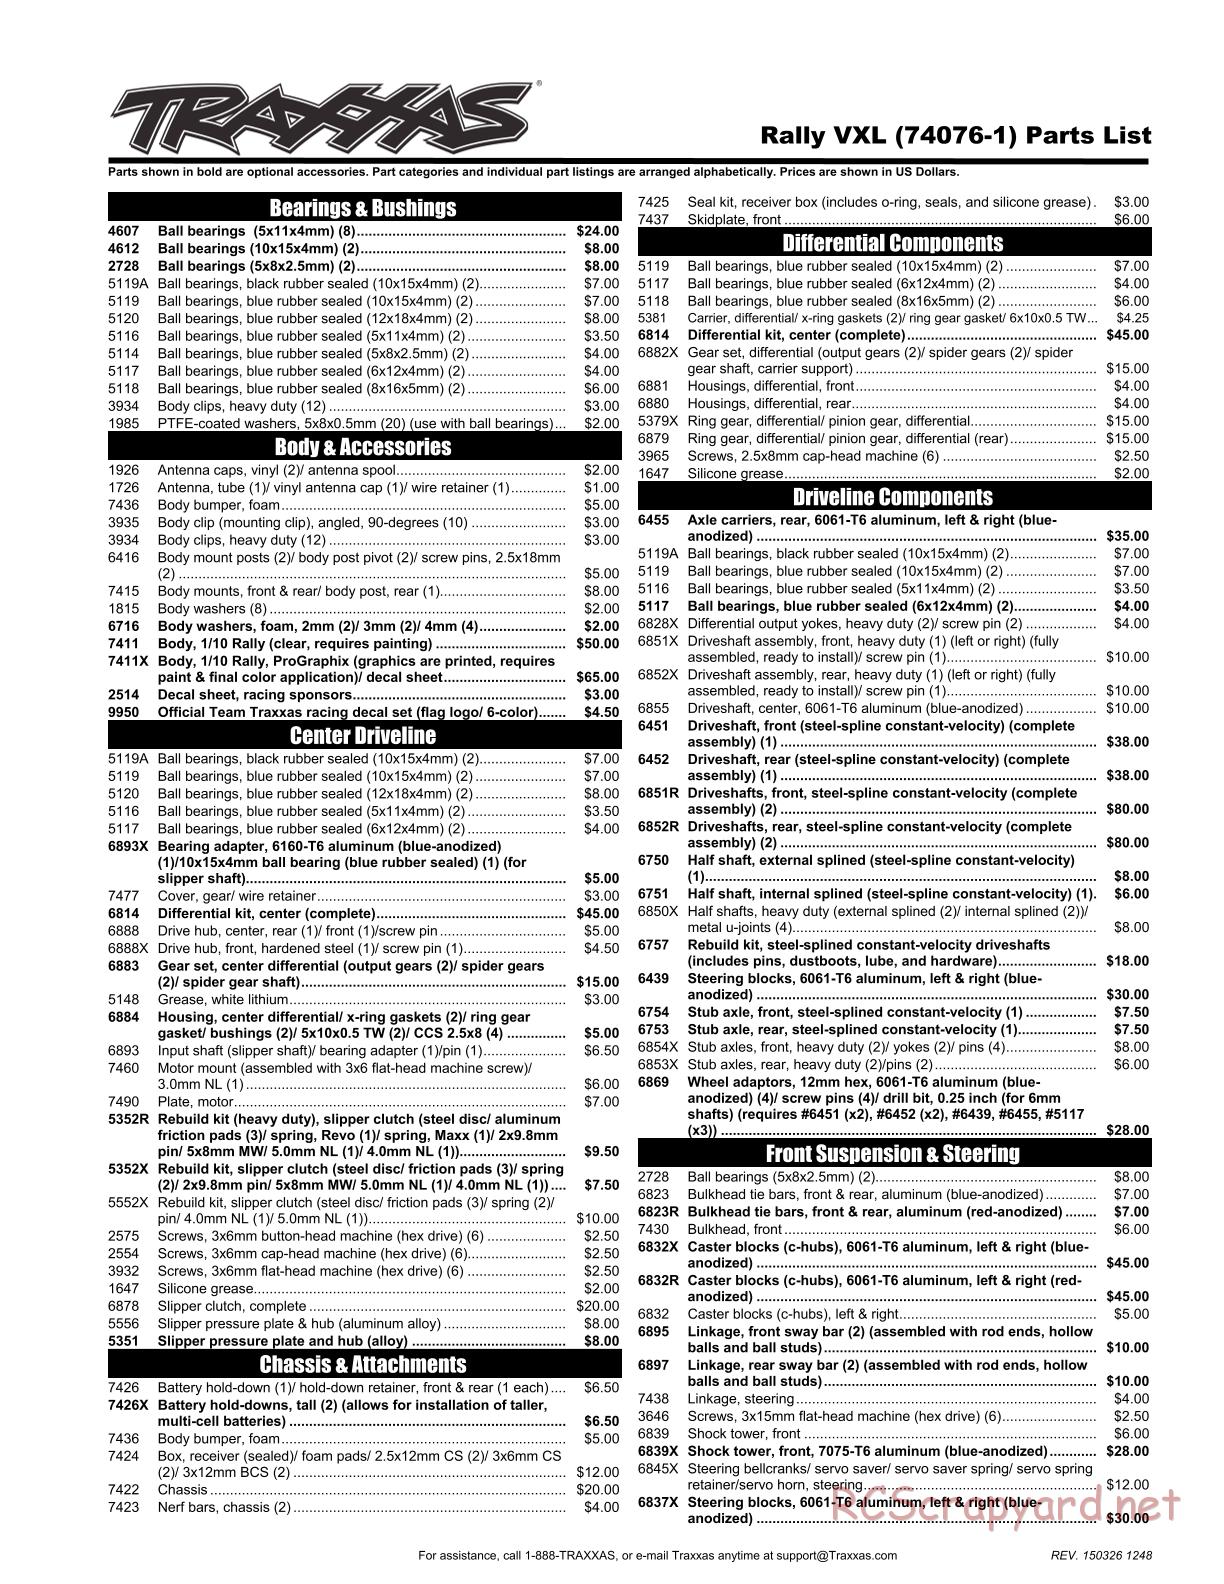 Traxxas - Rally (2015) - Parts List - Page 1